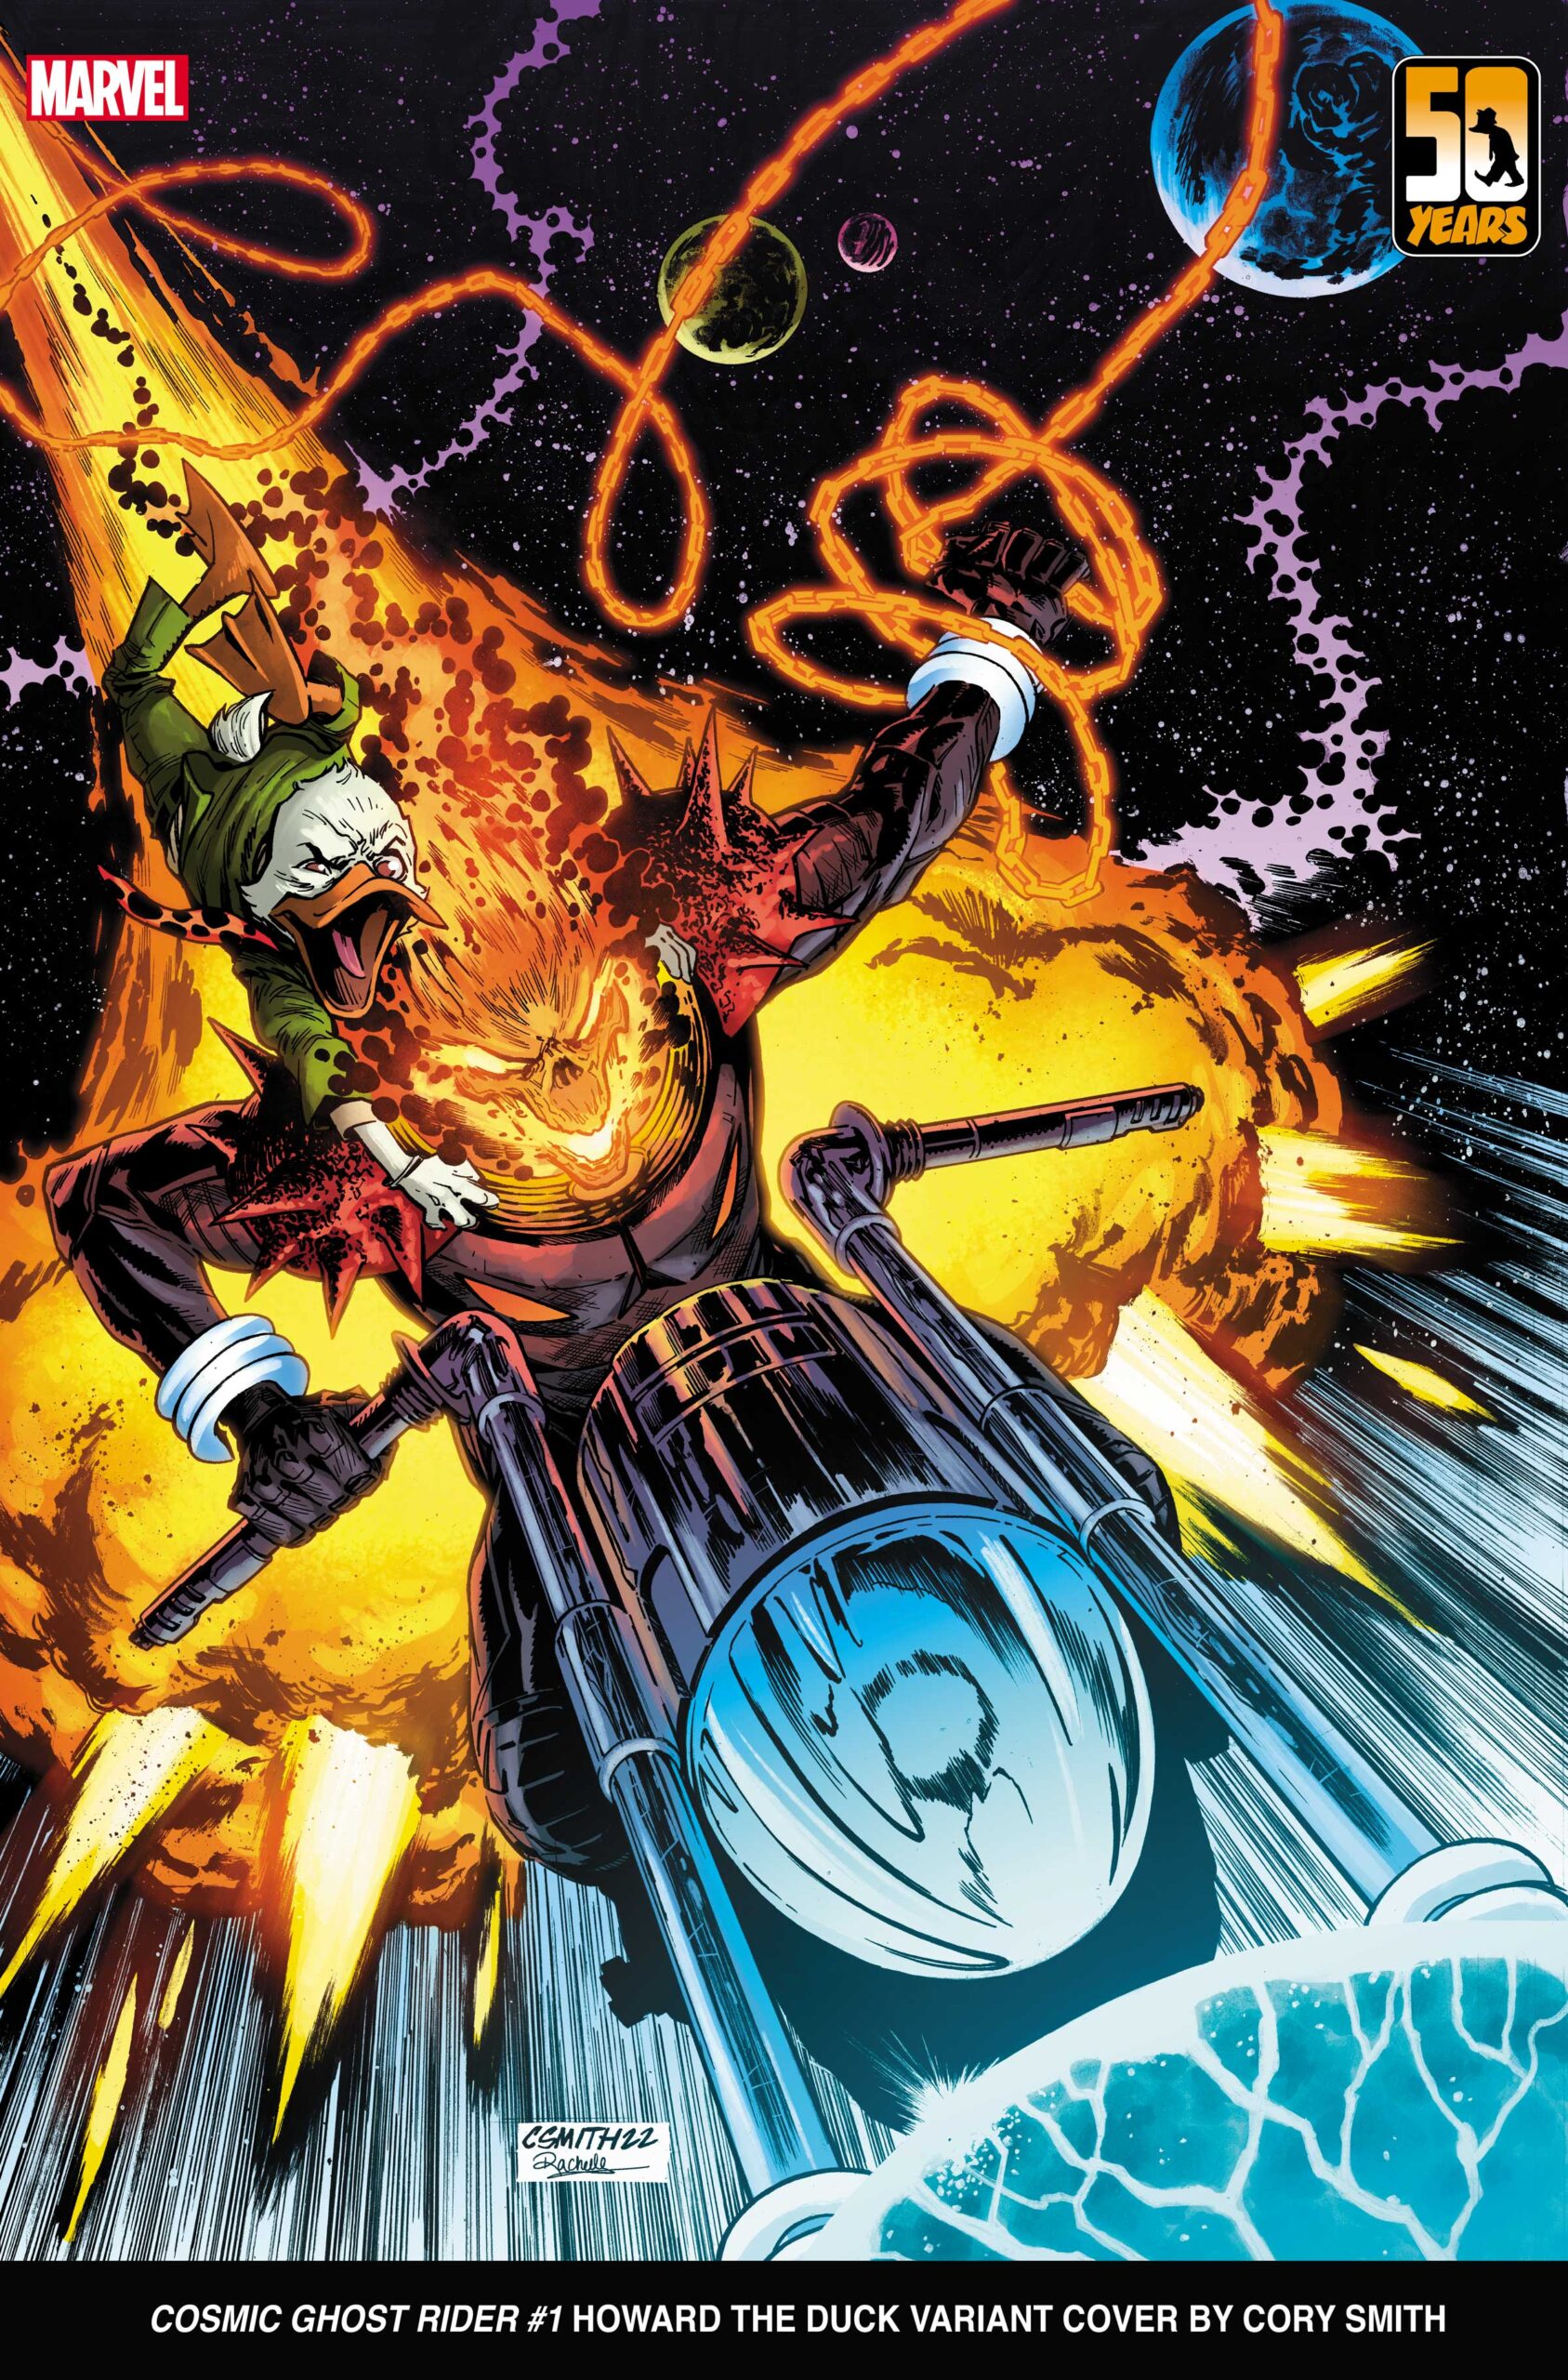 Howard the Duck Ghost Rider variant